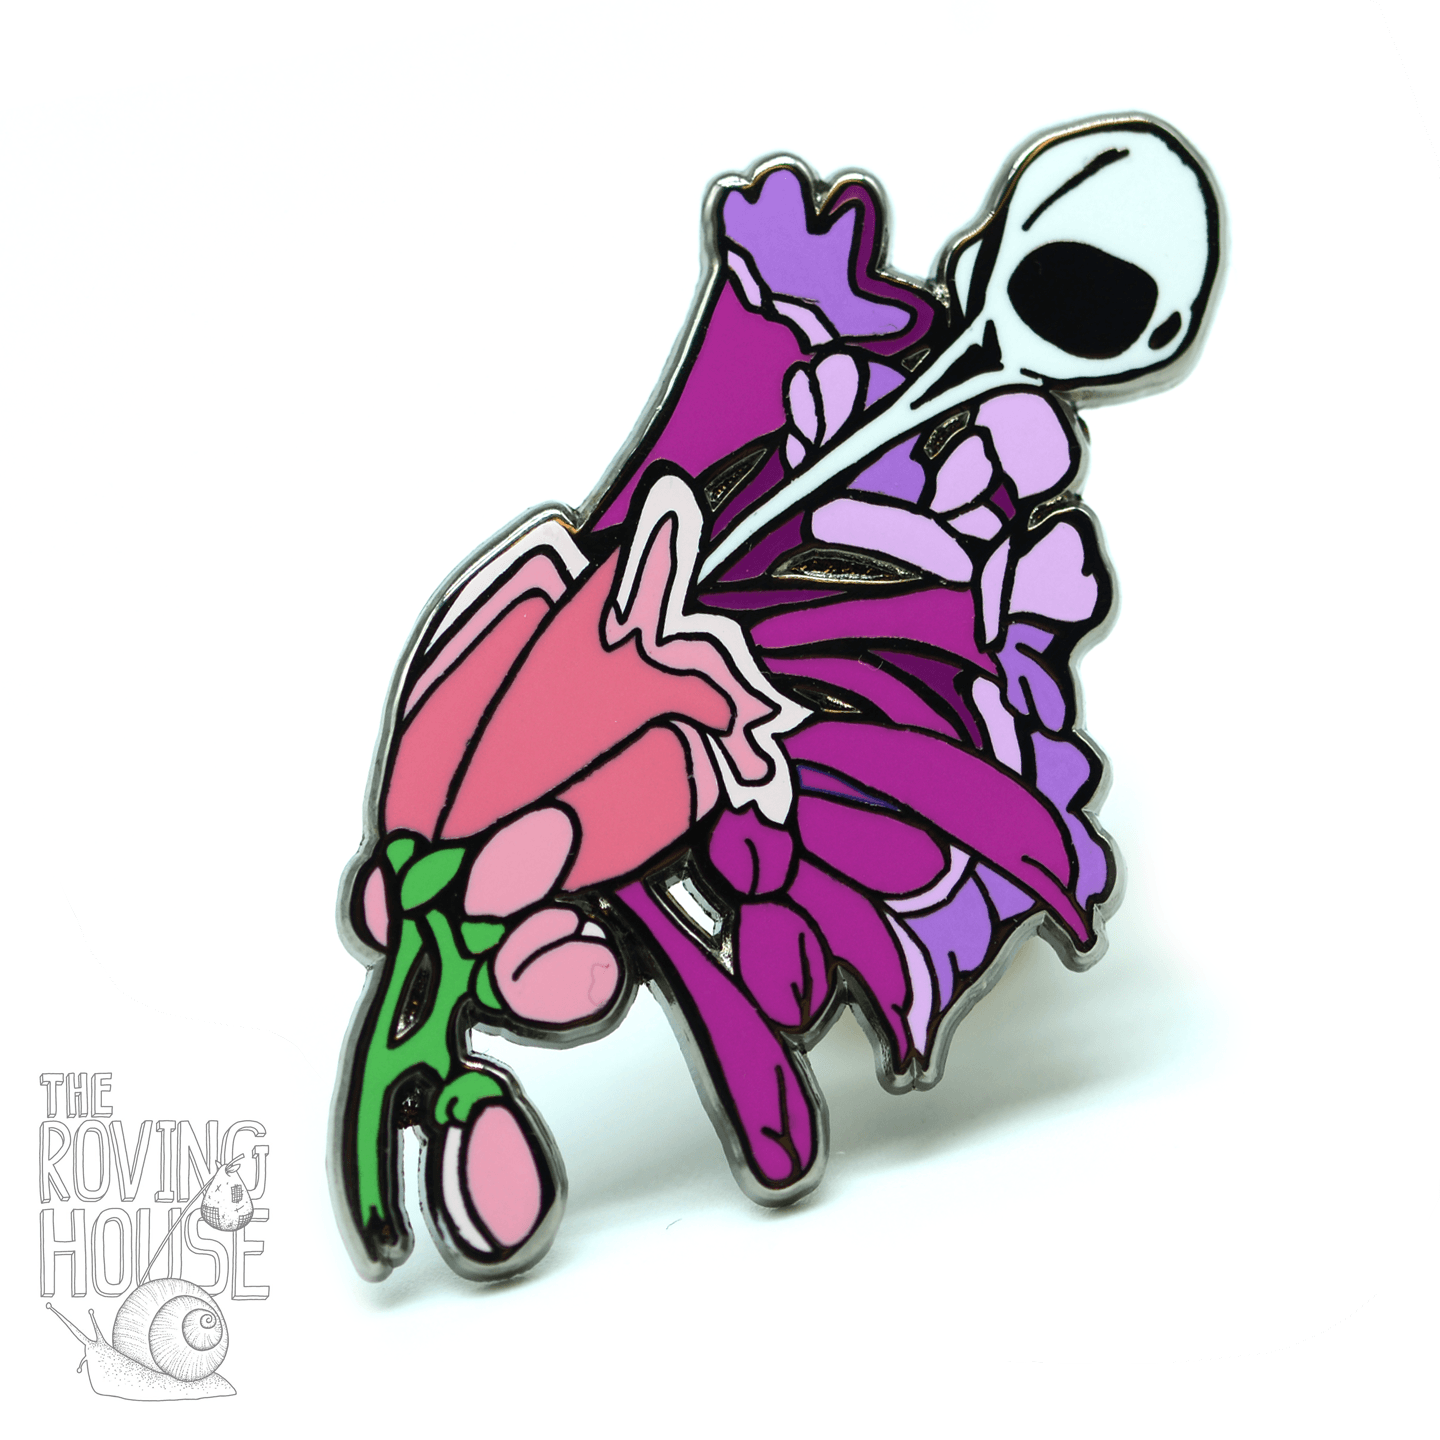 A hard enamel pin of a hummingbird skull sipping from some blossoms.